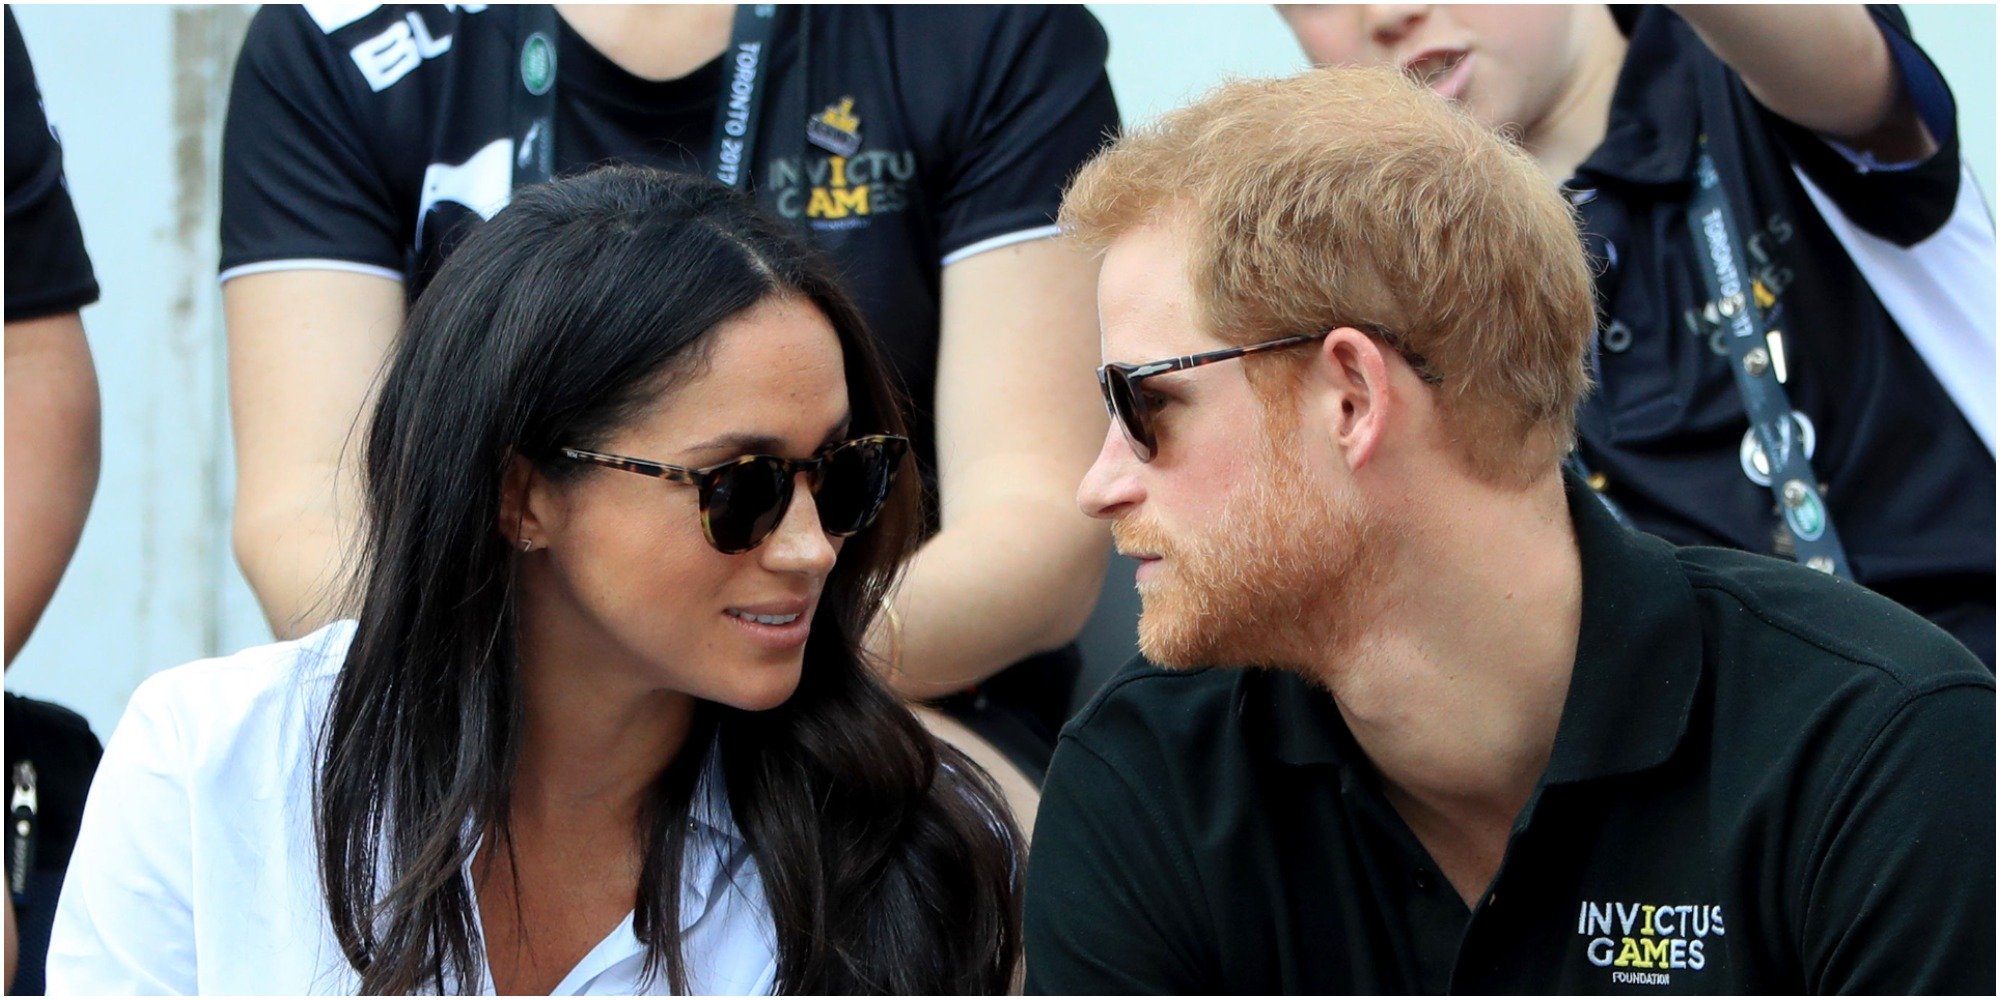 Meghan Markle and Prince Harry at the Invictus Games 2017.